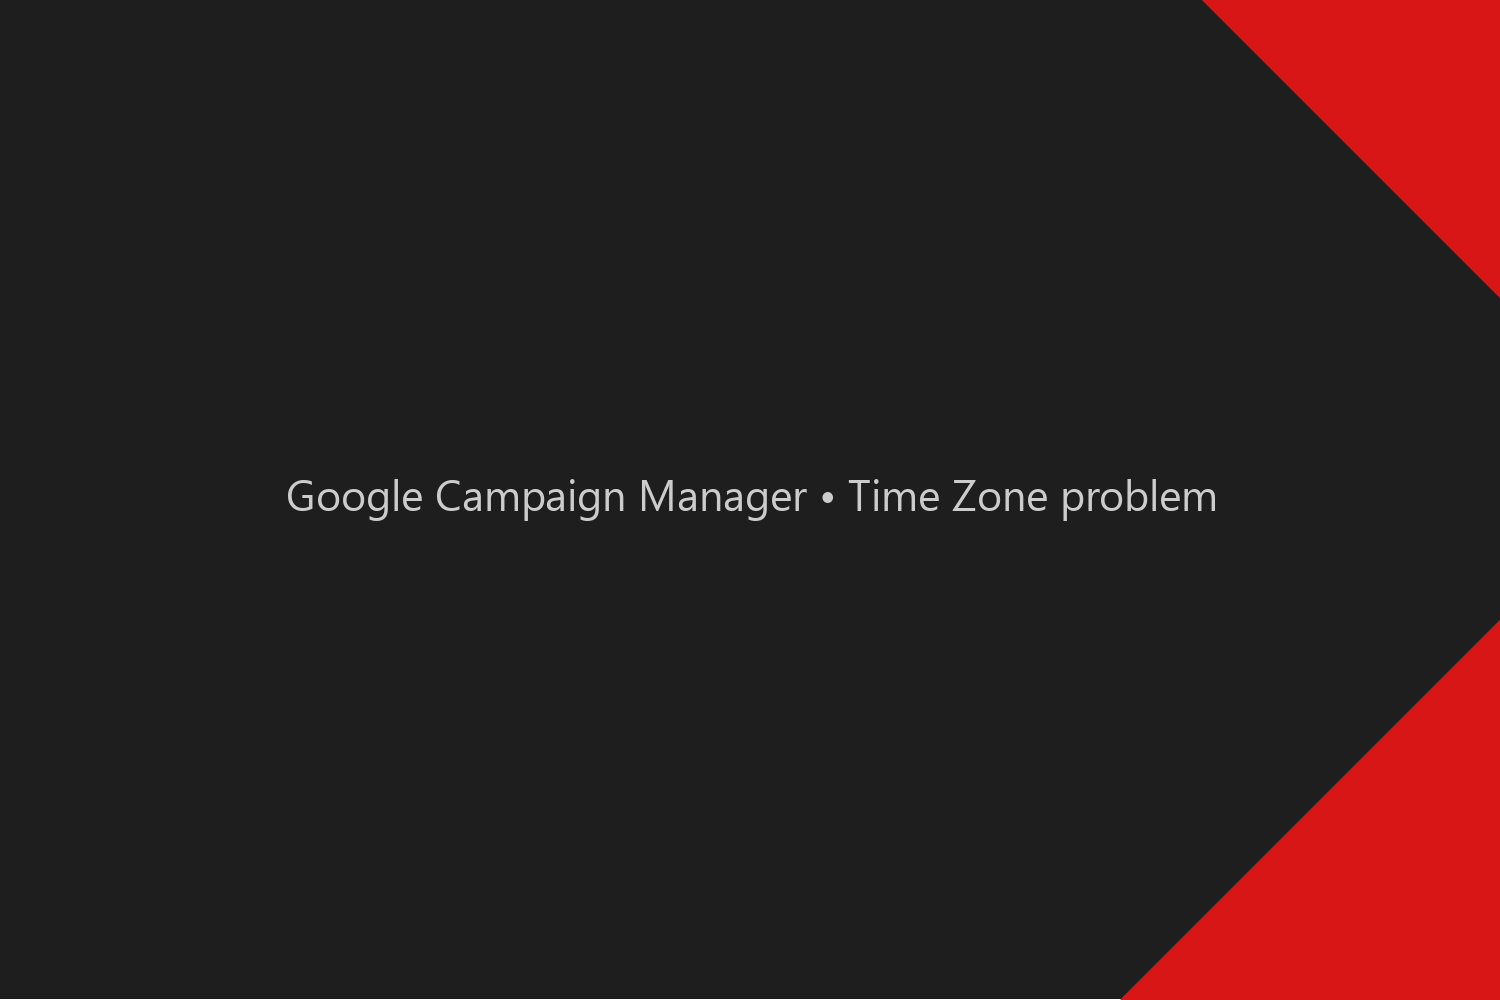 Google Campaign Manager • Time Zone problem